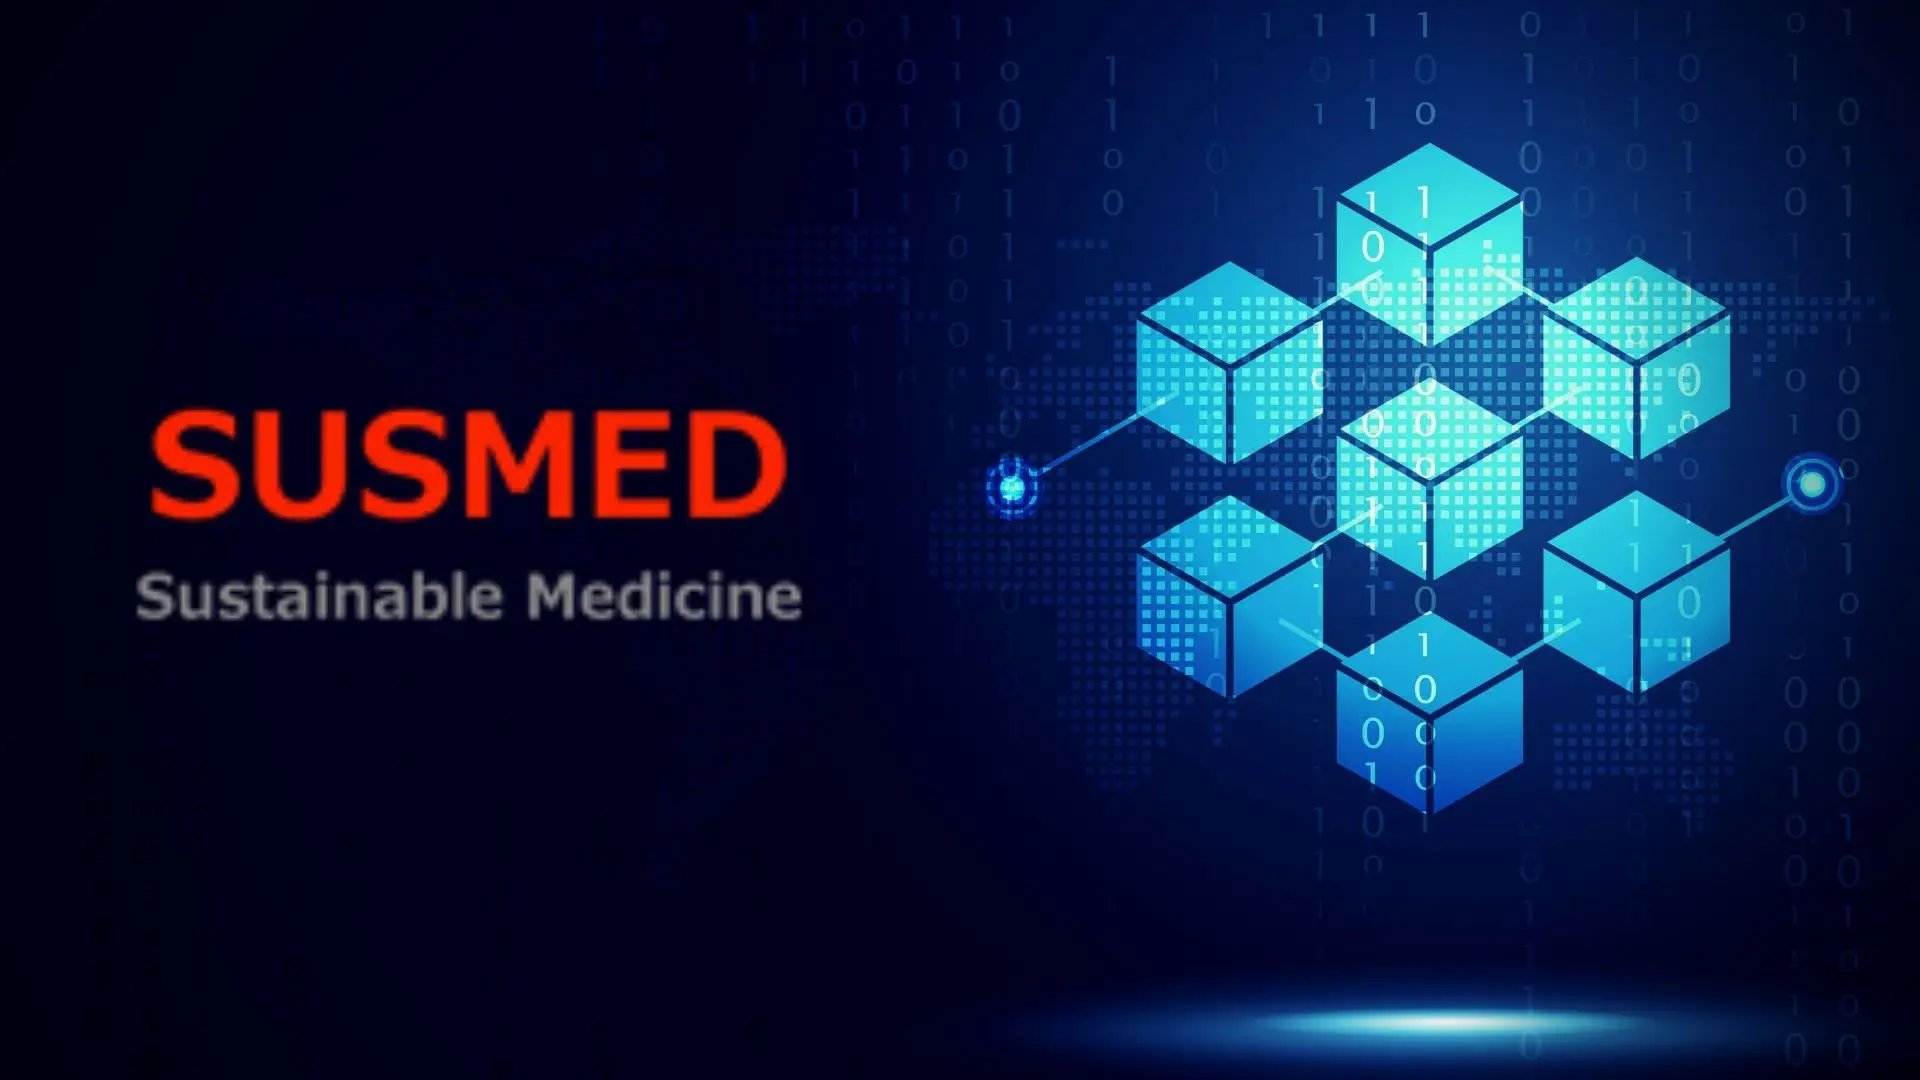 SUSMED Optimizes Clinical Trials with Blockchain Technology